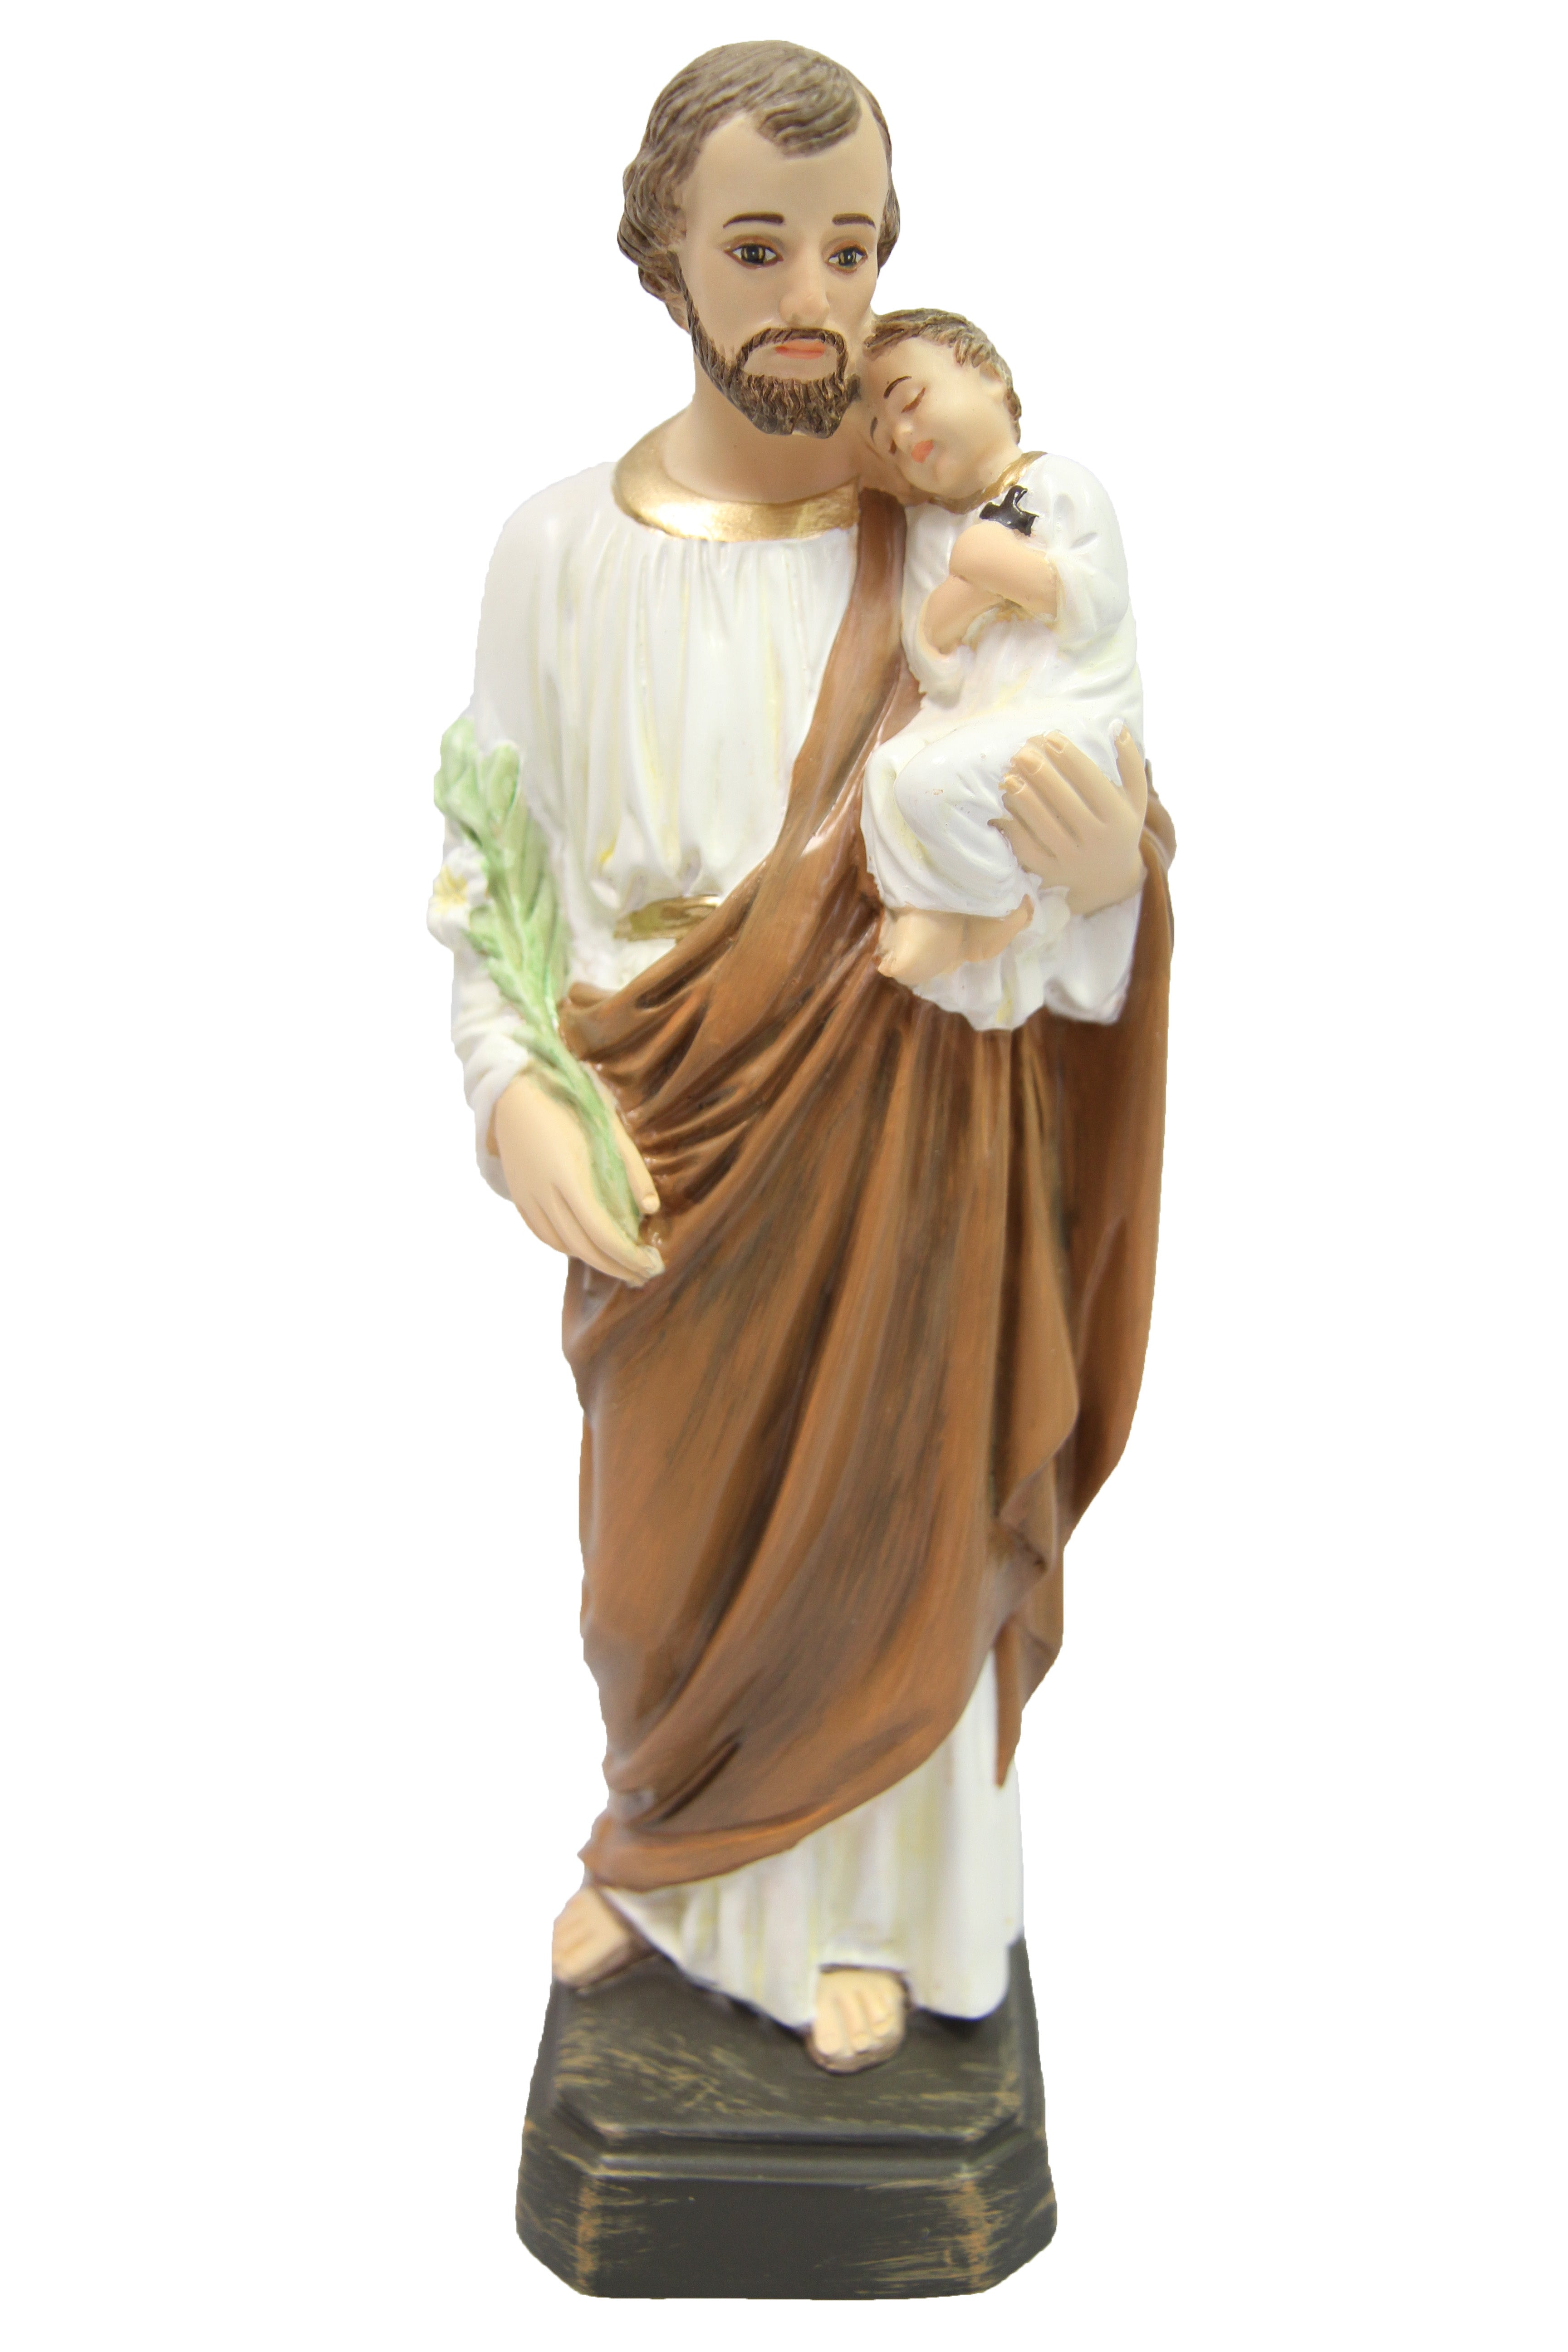 12 Inch Saint Joseph with Baby Jesus Catholic Statue Sculpture Vittoria Collection Made in Italy